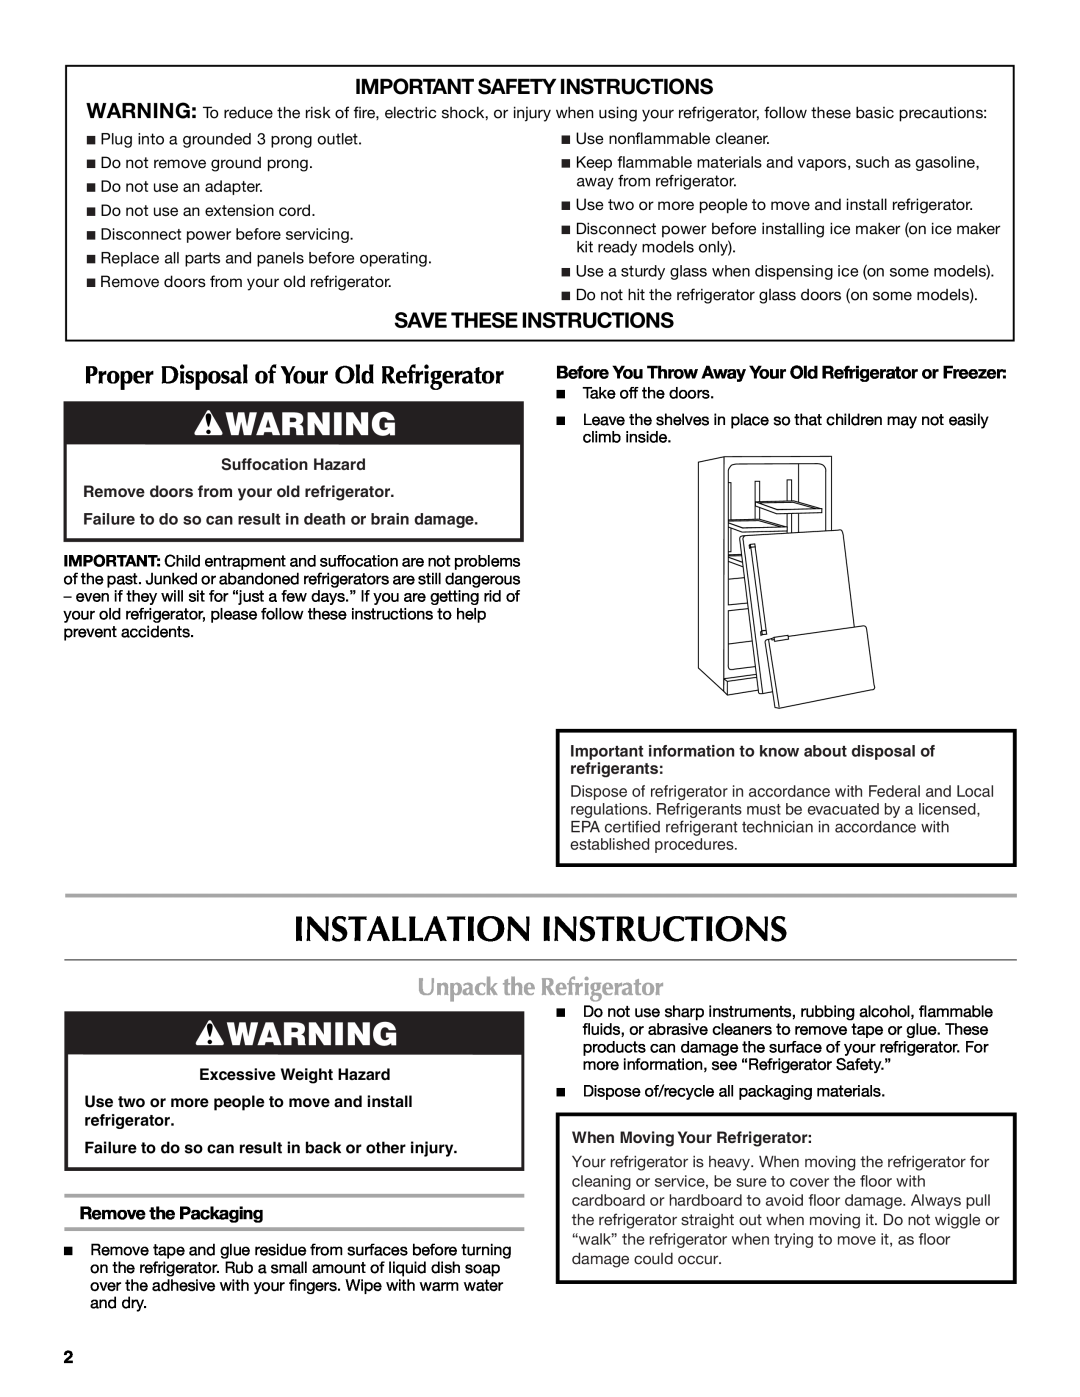 Maytag W10366206A Installation Instructions, Unpack the Refrigerator, Important Safety Instructions, Remove the Packaging 